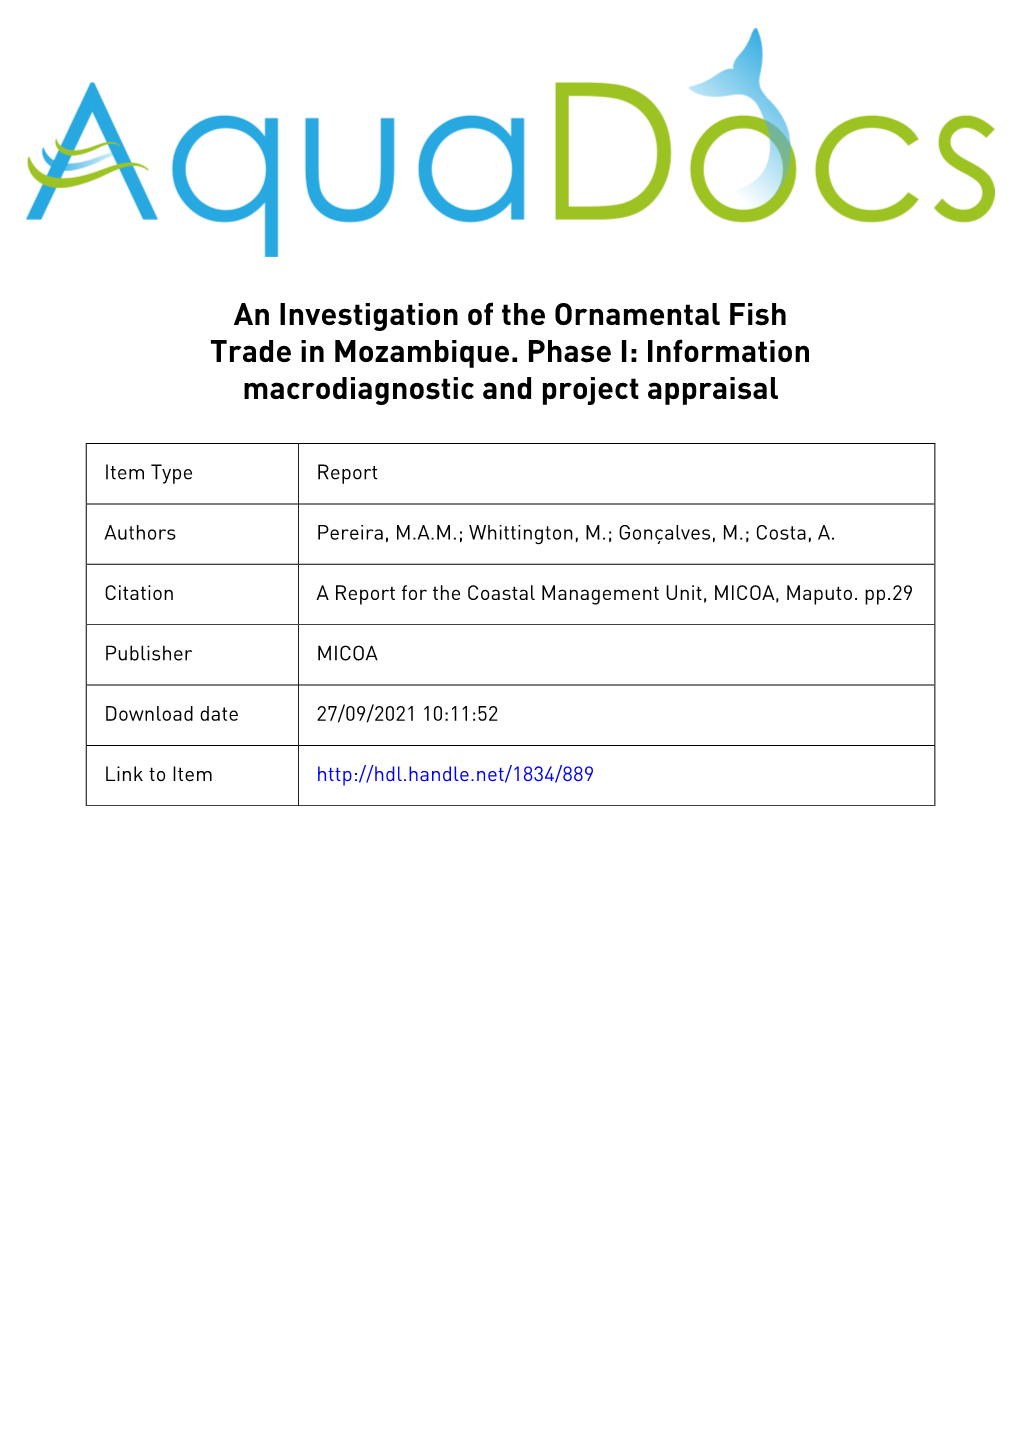 An Investigation of the Ornamental Fish Trade in Mozambique